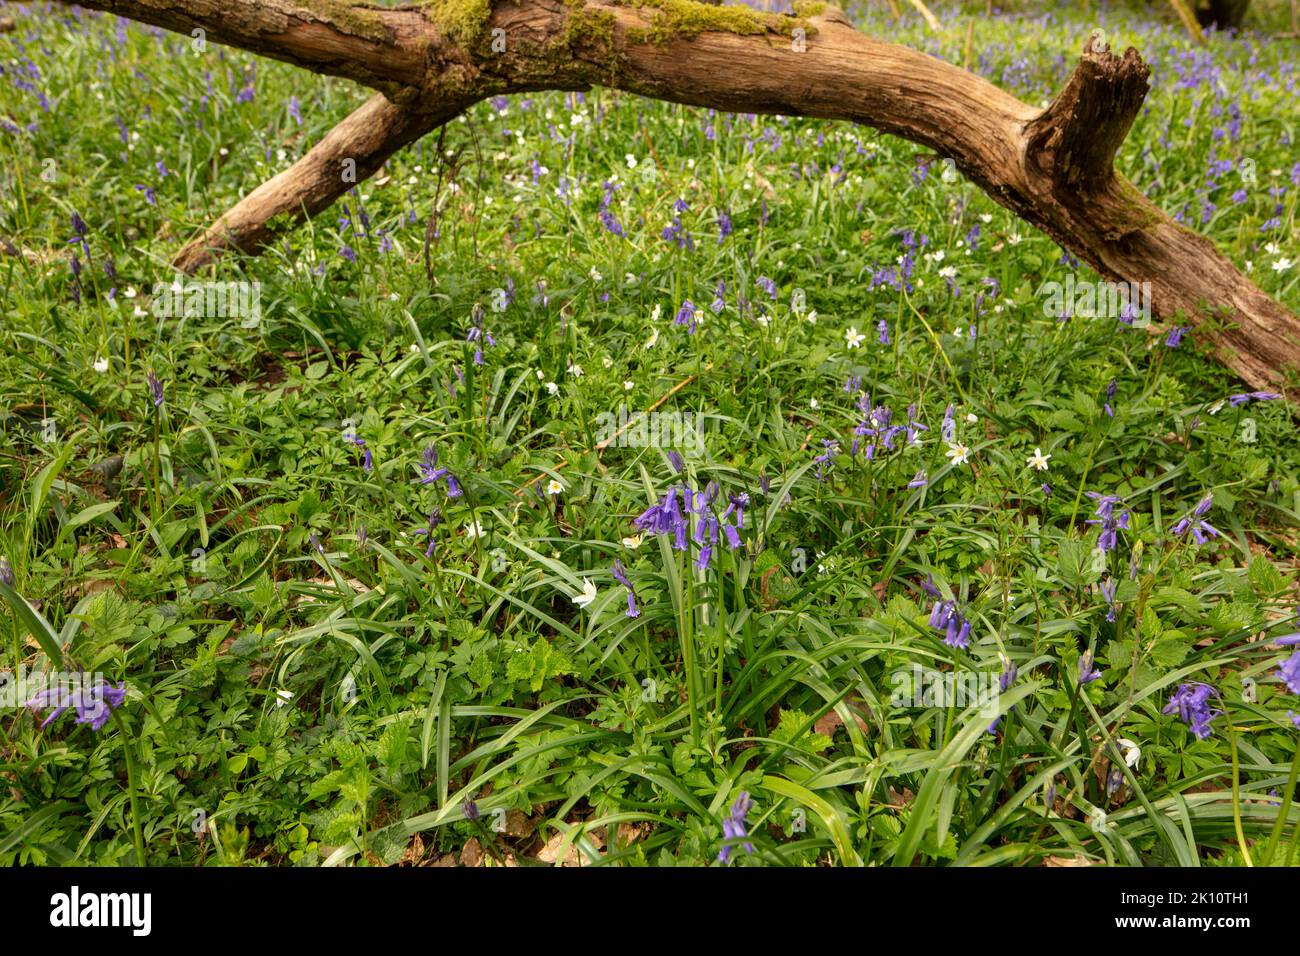 Natural environmental portrait of common Bluebells in an English woodland landscape setting Stock Photo